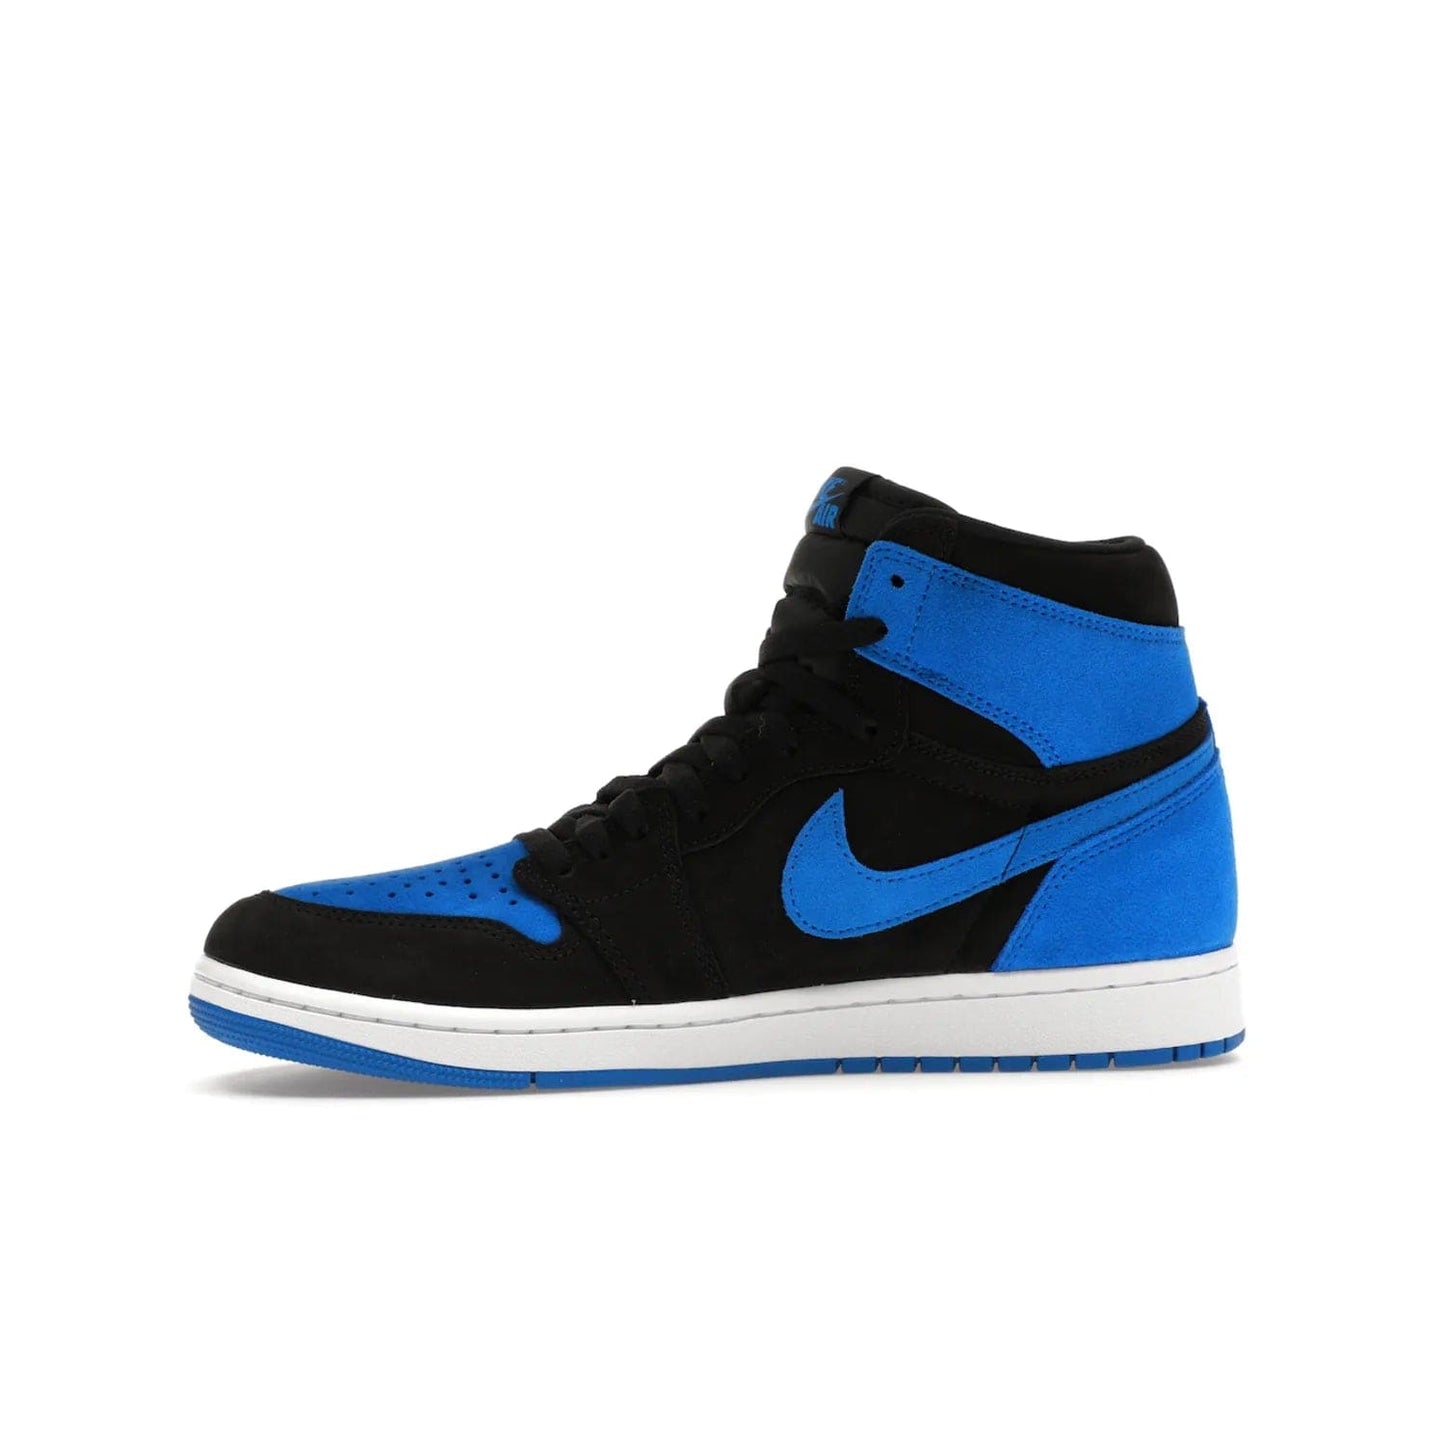 Jordan 1 Retro High OG Royal Reimagined - Image 18 - Only at www.BallersClubKickz.com - ####
Old meets the new: Jordan 1 Retro High OG 'Royal Reimagined' is a bold statement of evolution with its royal blue and black suede material makeup. Swoosh overlays, Wings logos, padded ankle collars and Nike Air tags maintain the OG's legendary lineage. Get a pair on November 4th and be part of a fearless, unyielding story.